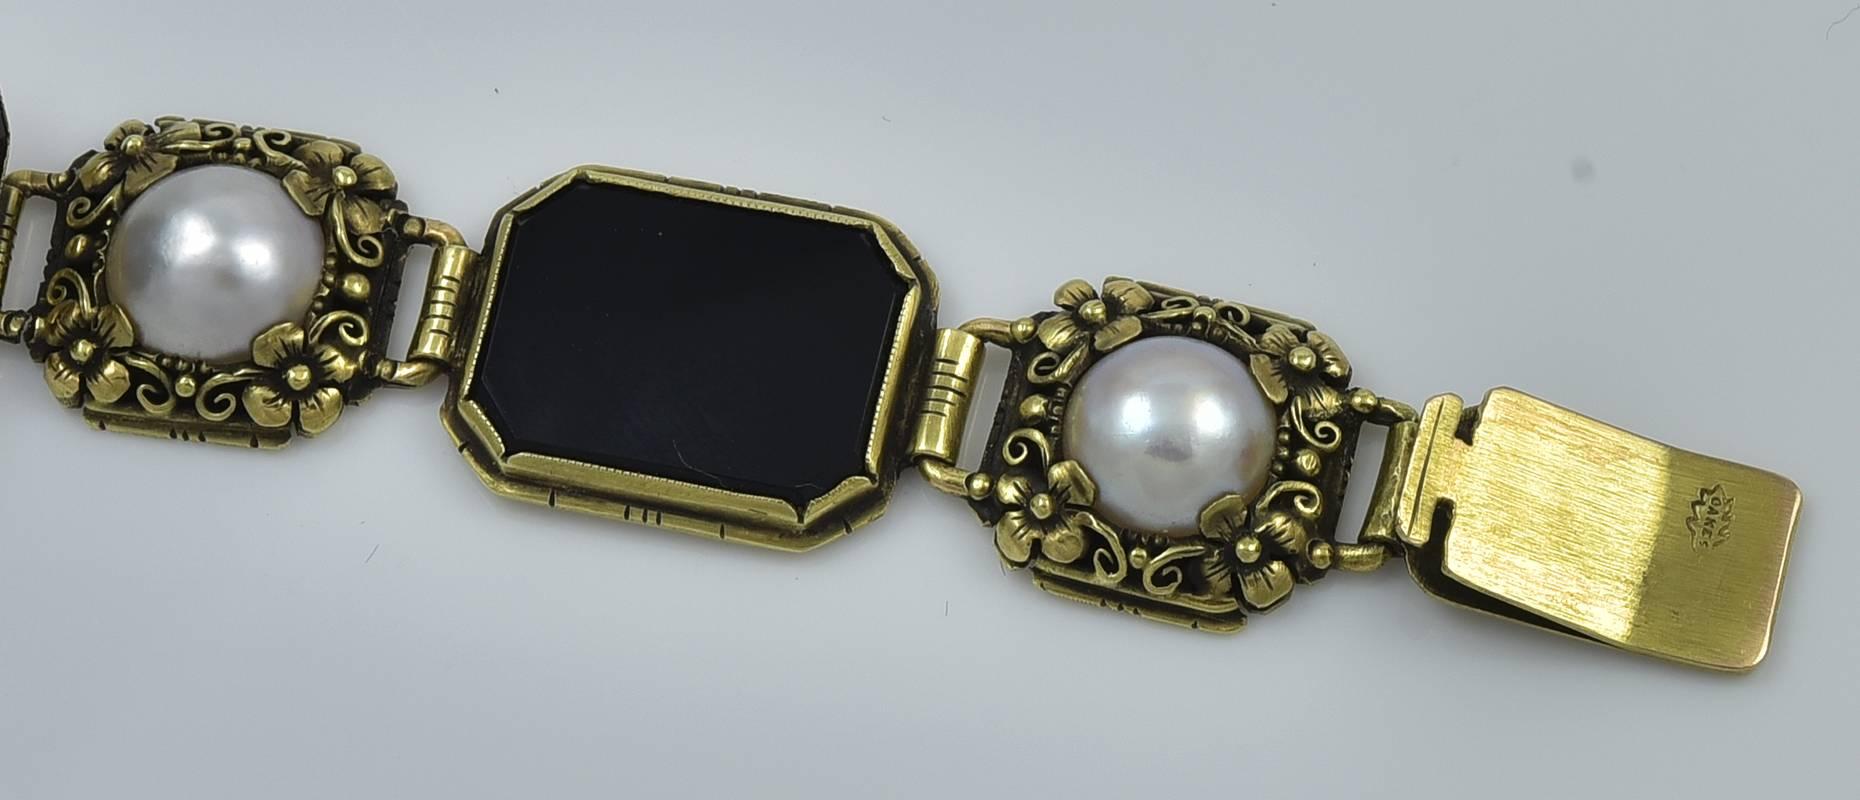 Oakes Studios Gold, Onyx and Pearl Bracelet. This American Arts and Crafts bracelet was made by the Oakes studio and attributed to Edward Oakes. The bracelet measures 7.25 inches long and .5 inches wide. The bracelet is composed of ten links each in